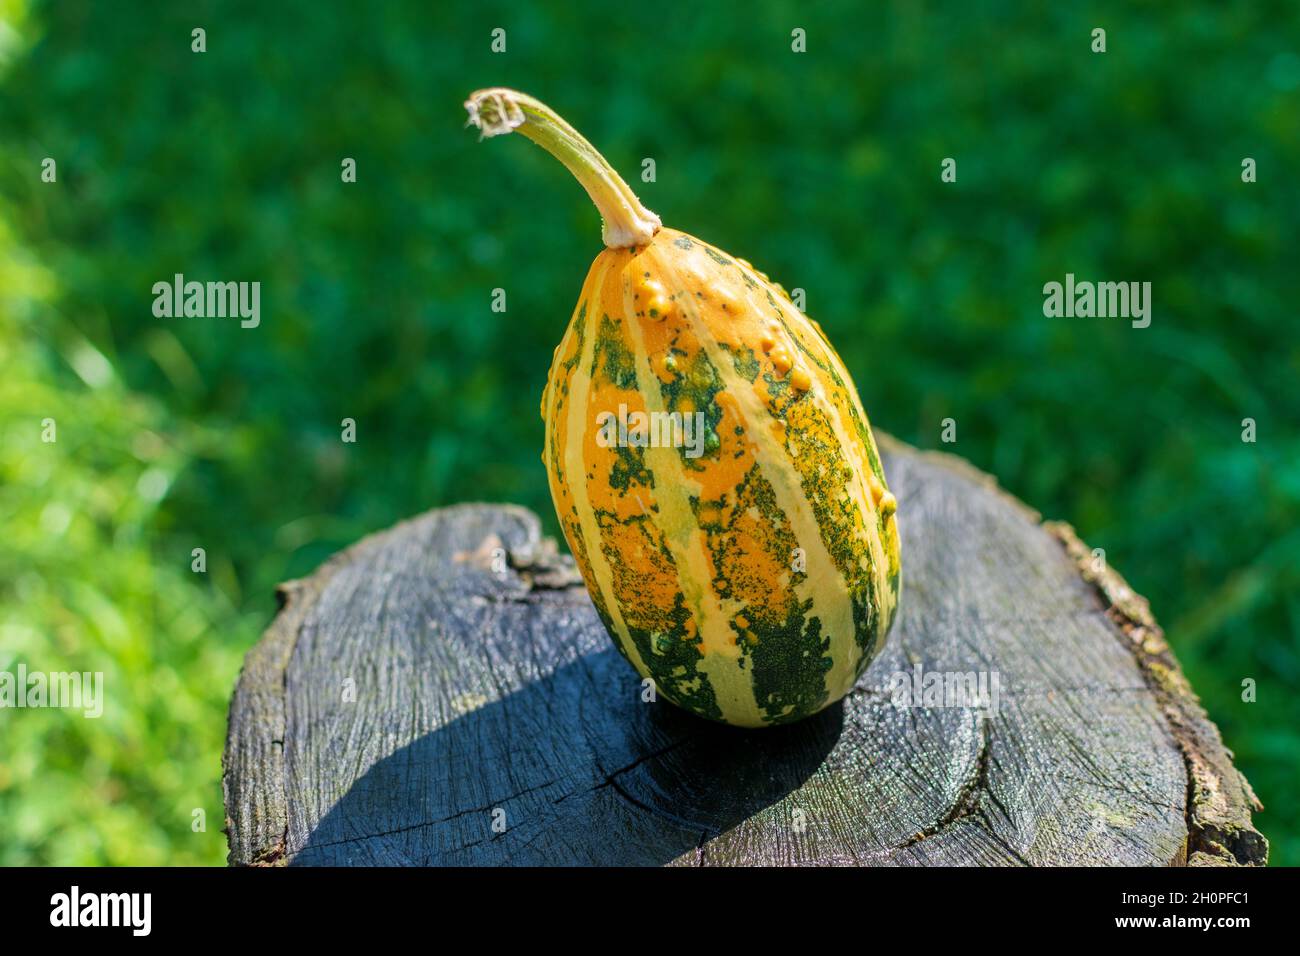 Long striped gourd or pumpkin on a wooden table in nature Stock Photo